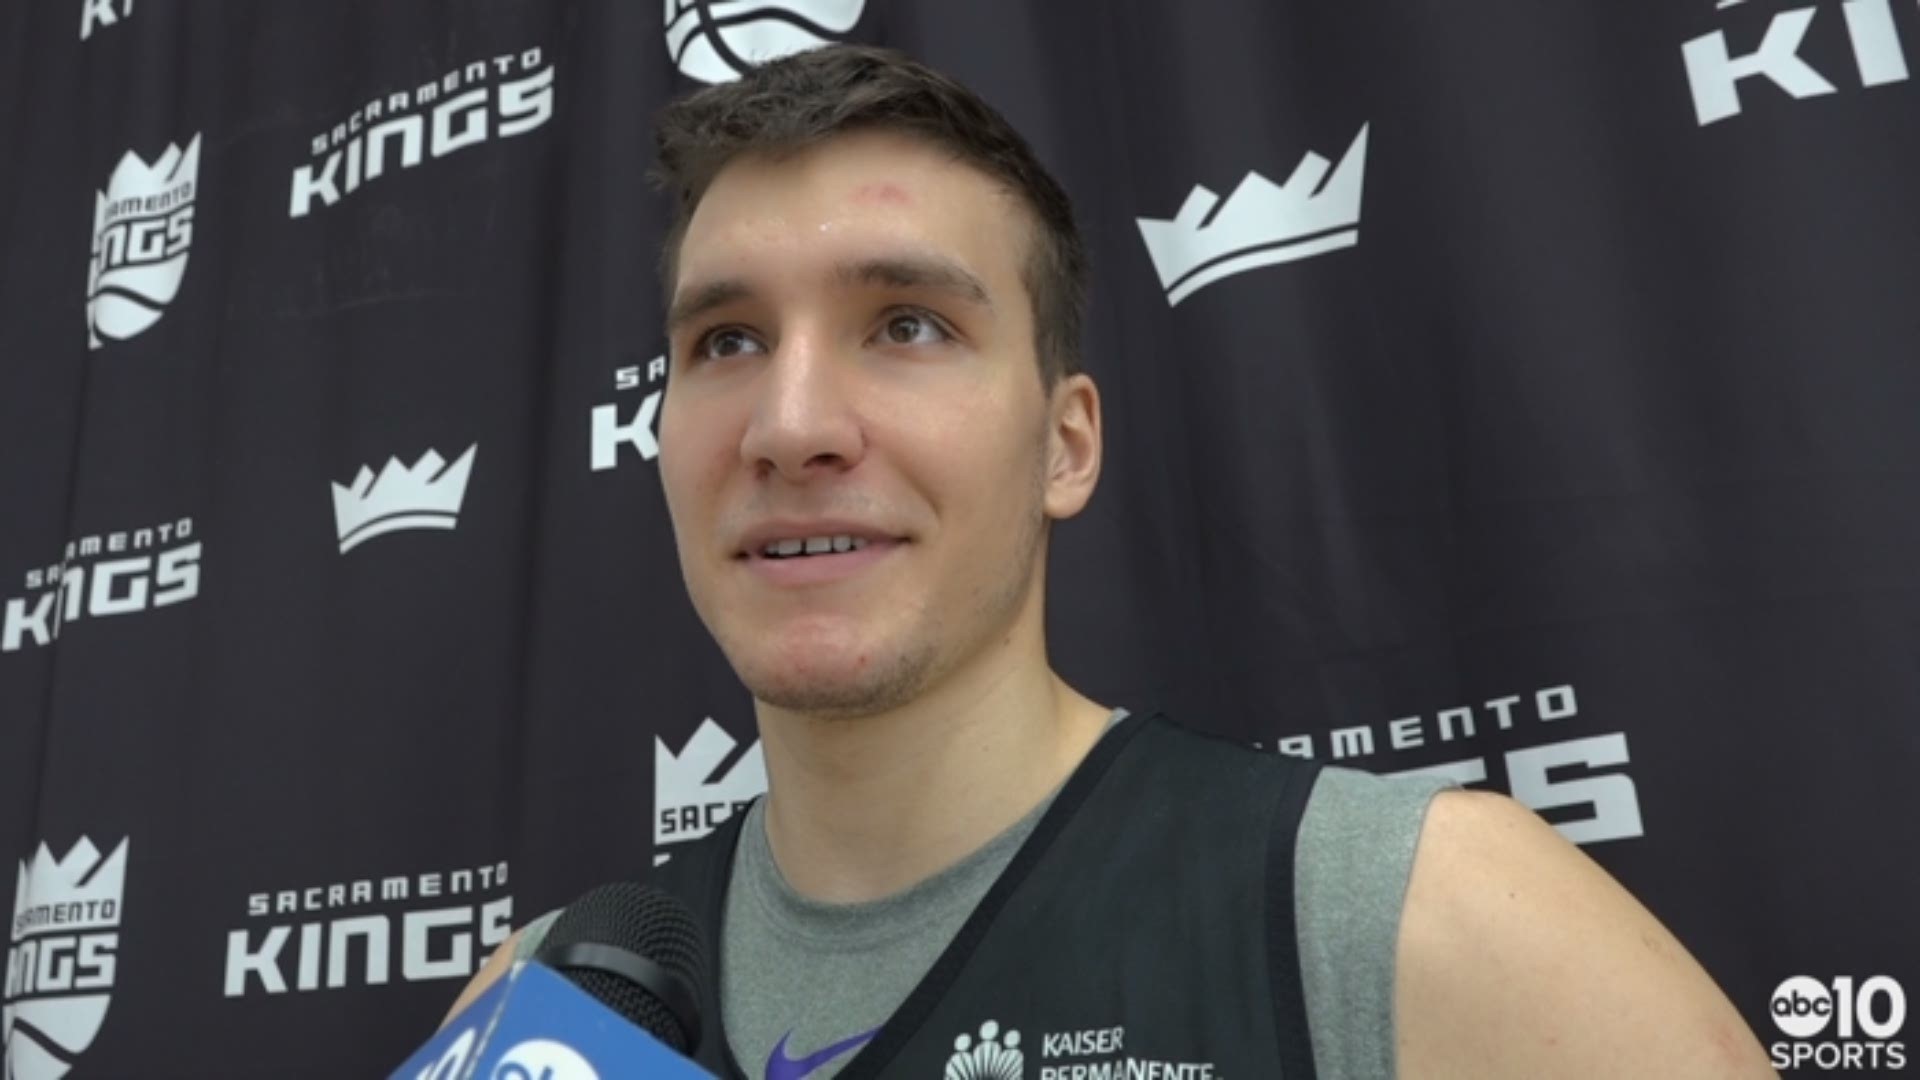 Sacramento Kings guard Bogdan Bogdanovic talks about his team being tested physically against the Oklahoma City Thunder the night before, 'nutmegging' Steven Adams and looking ahead to Wednesday's game in Utah vs. the Jazz.